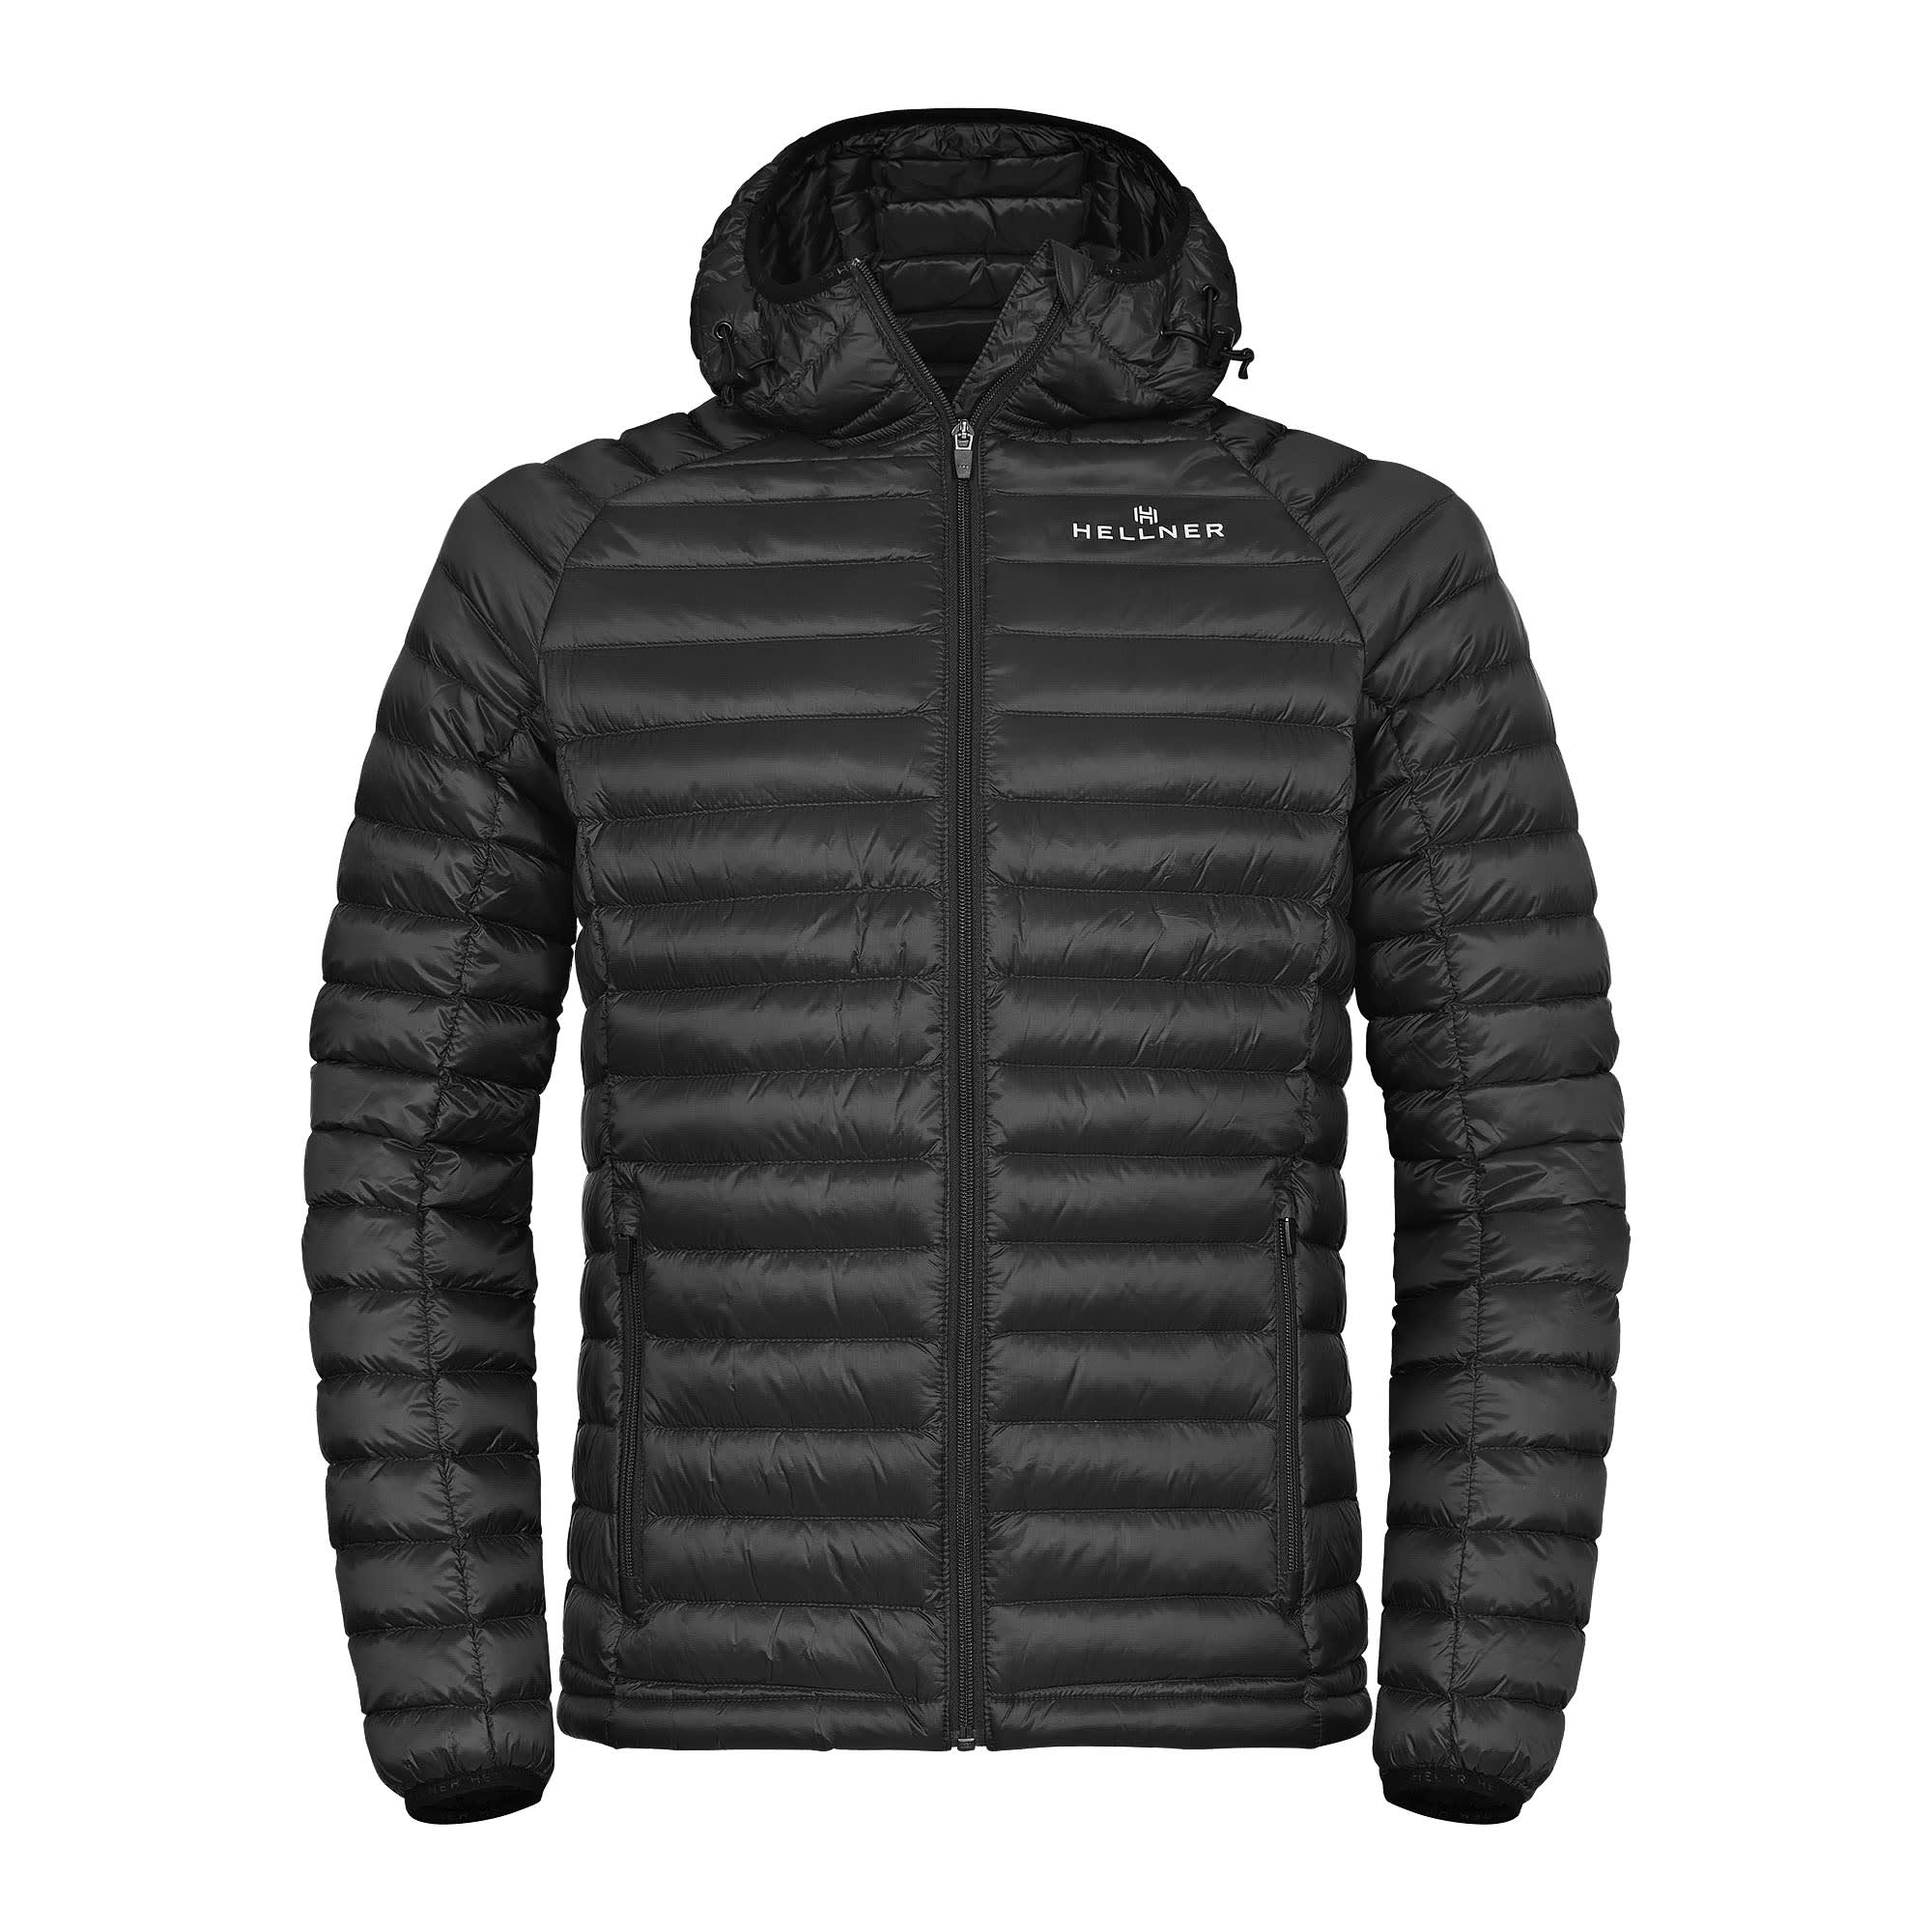 Buy Hellner Ripats Down Jacket Men's from Outnorth